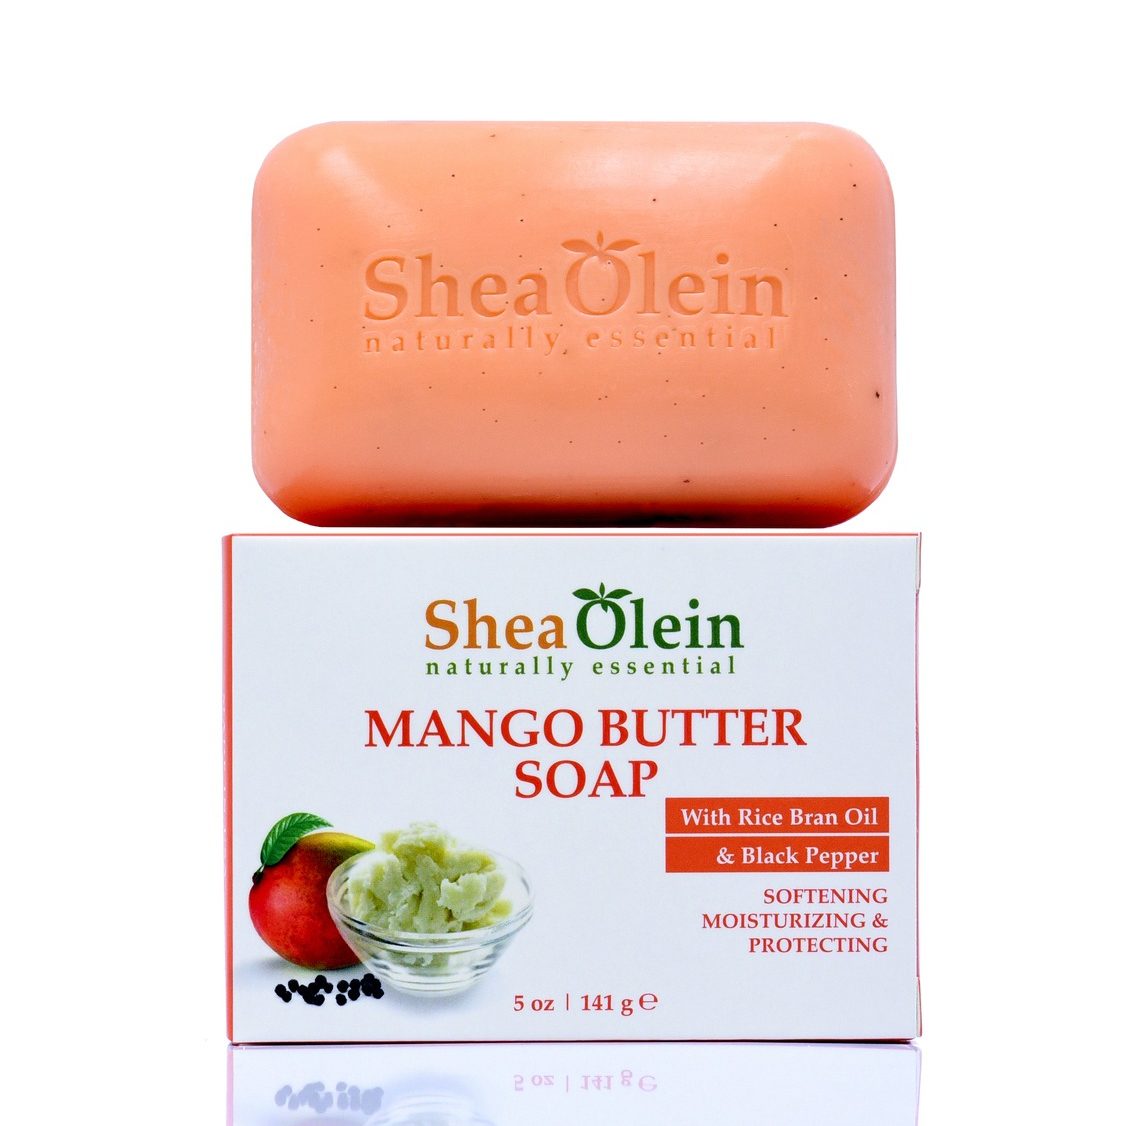 Mango Butter Soap with Rice Bran Oil & Rosemary Extract 5oz